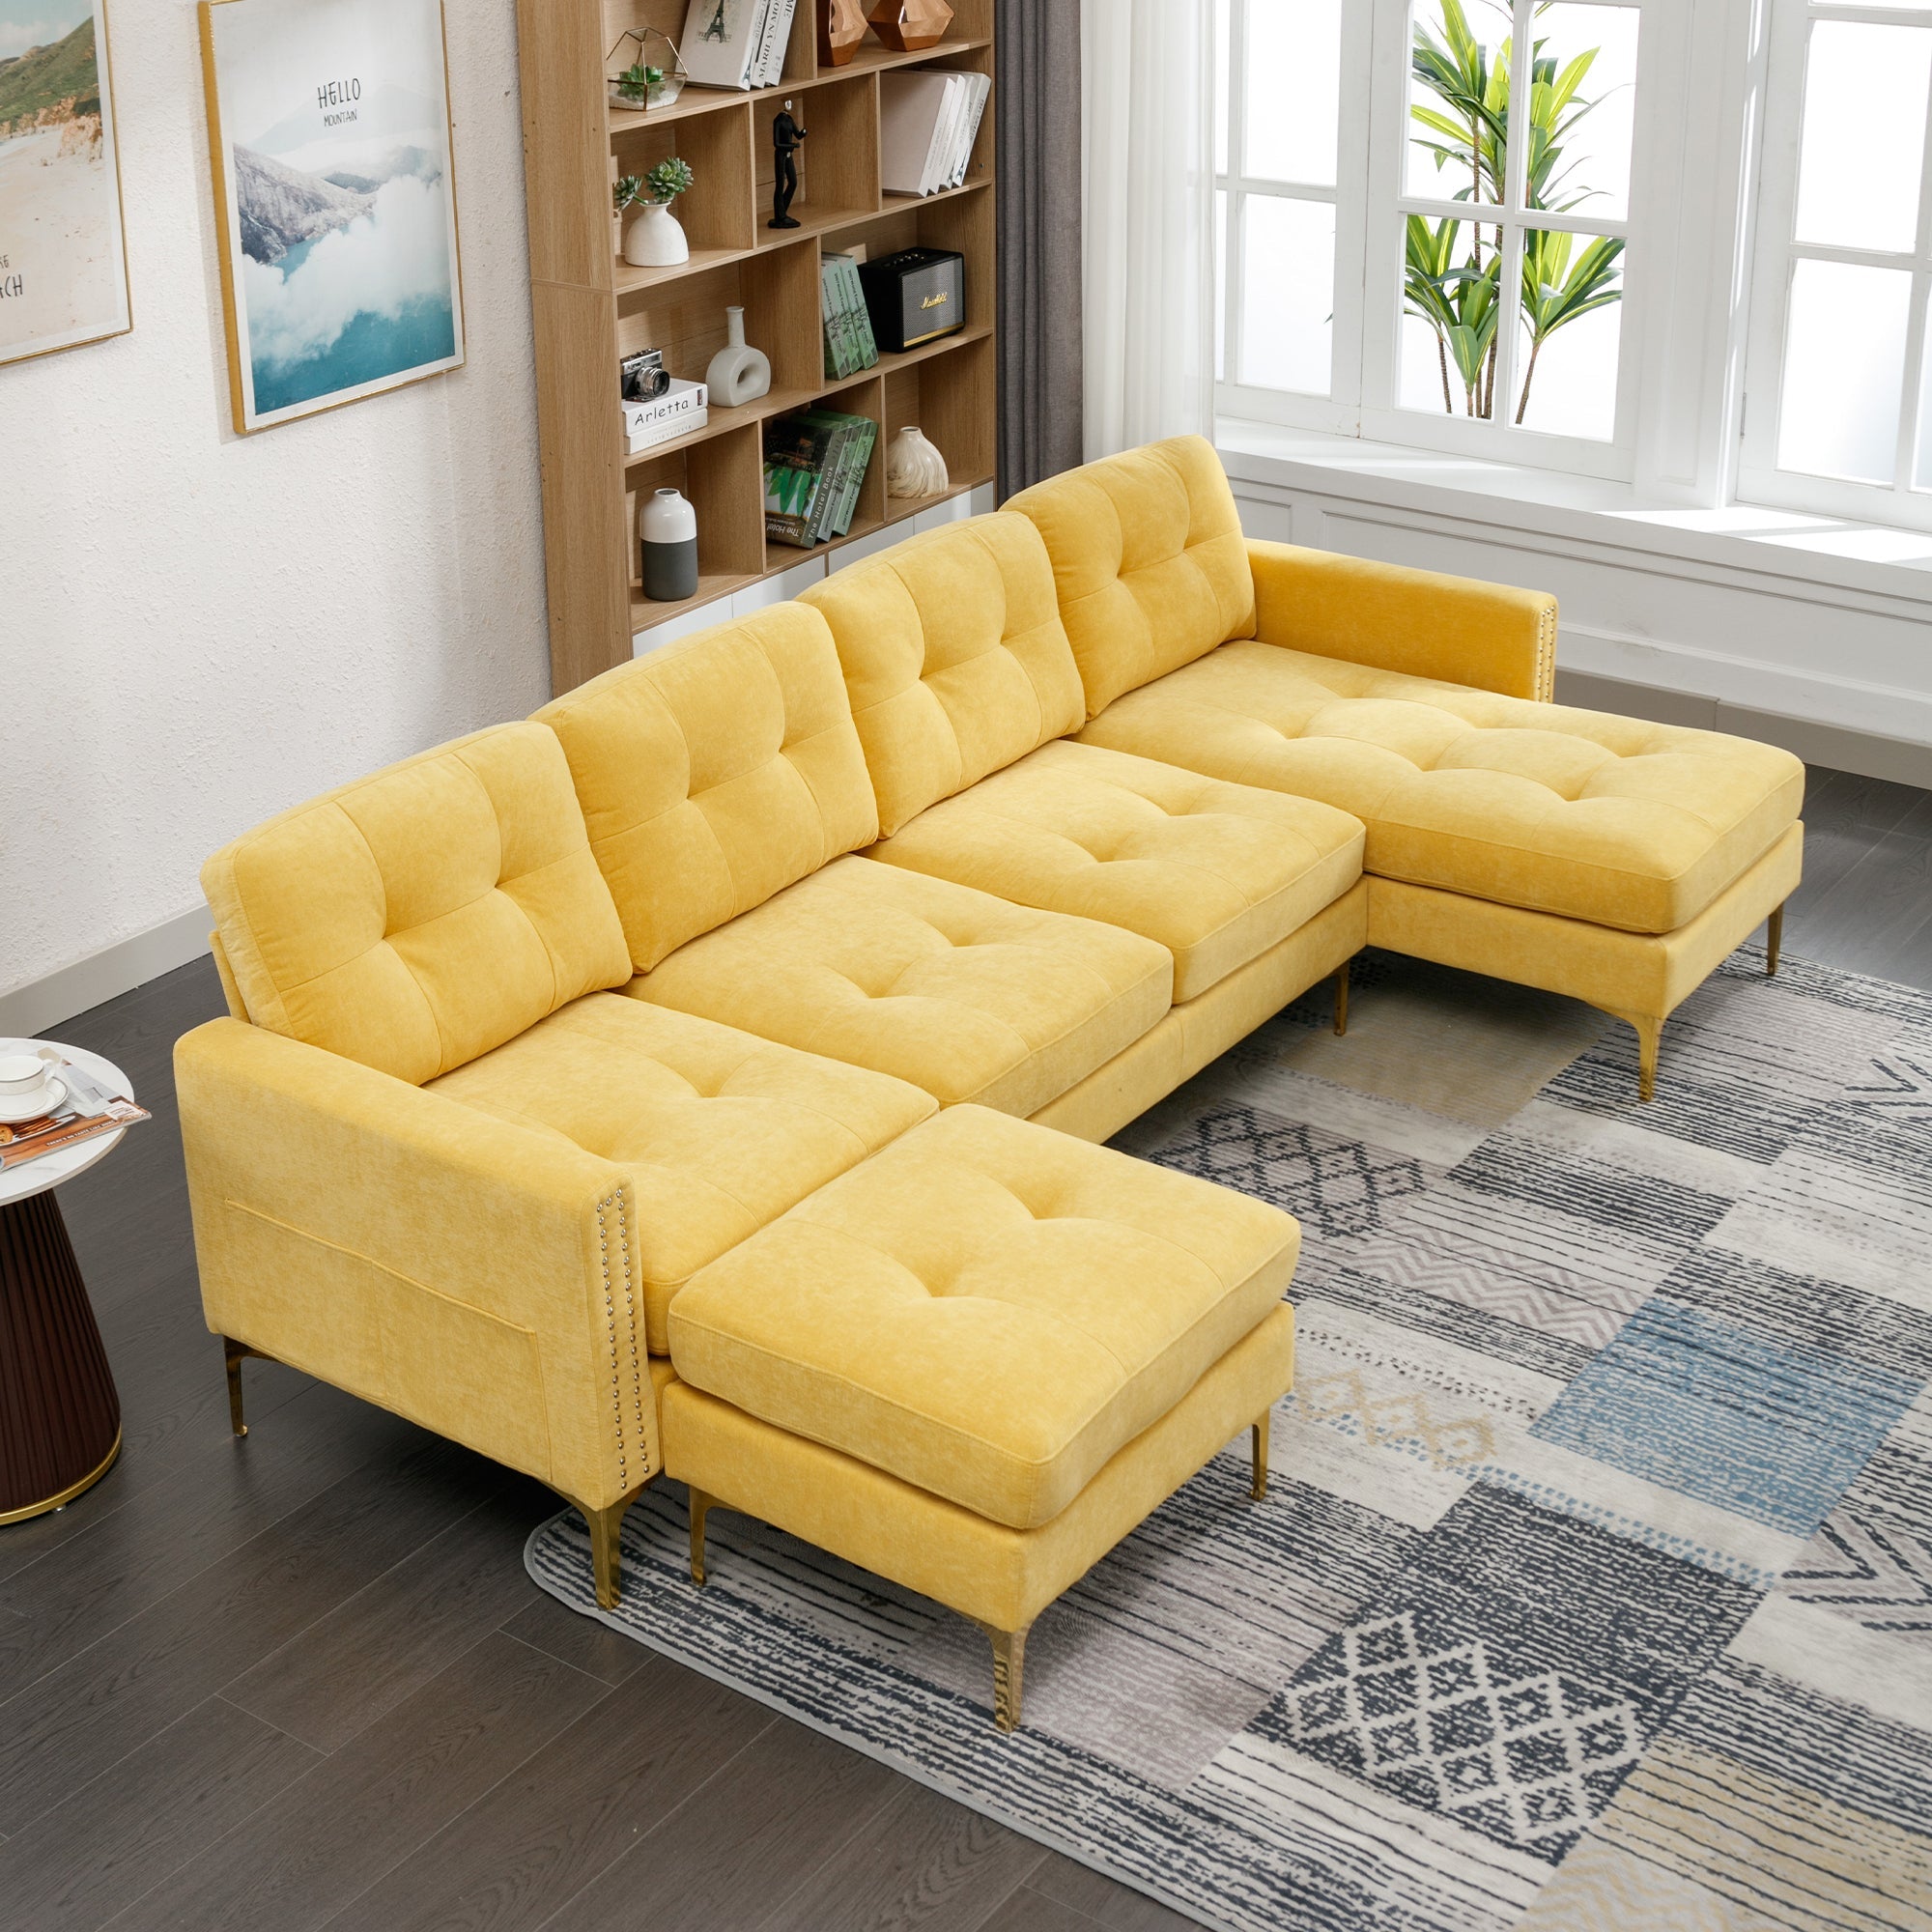 110" L-Shape Convertible Sectional Sofa Couch w/ Ottoman | Living Room, Apartment, Office | Yellow-Stationary Sectionals-American Furniture Outlet